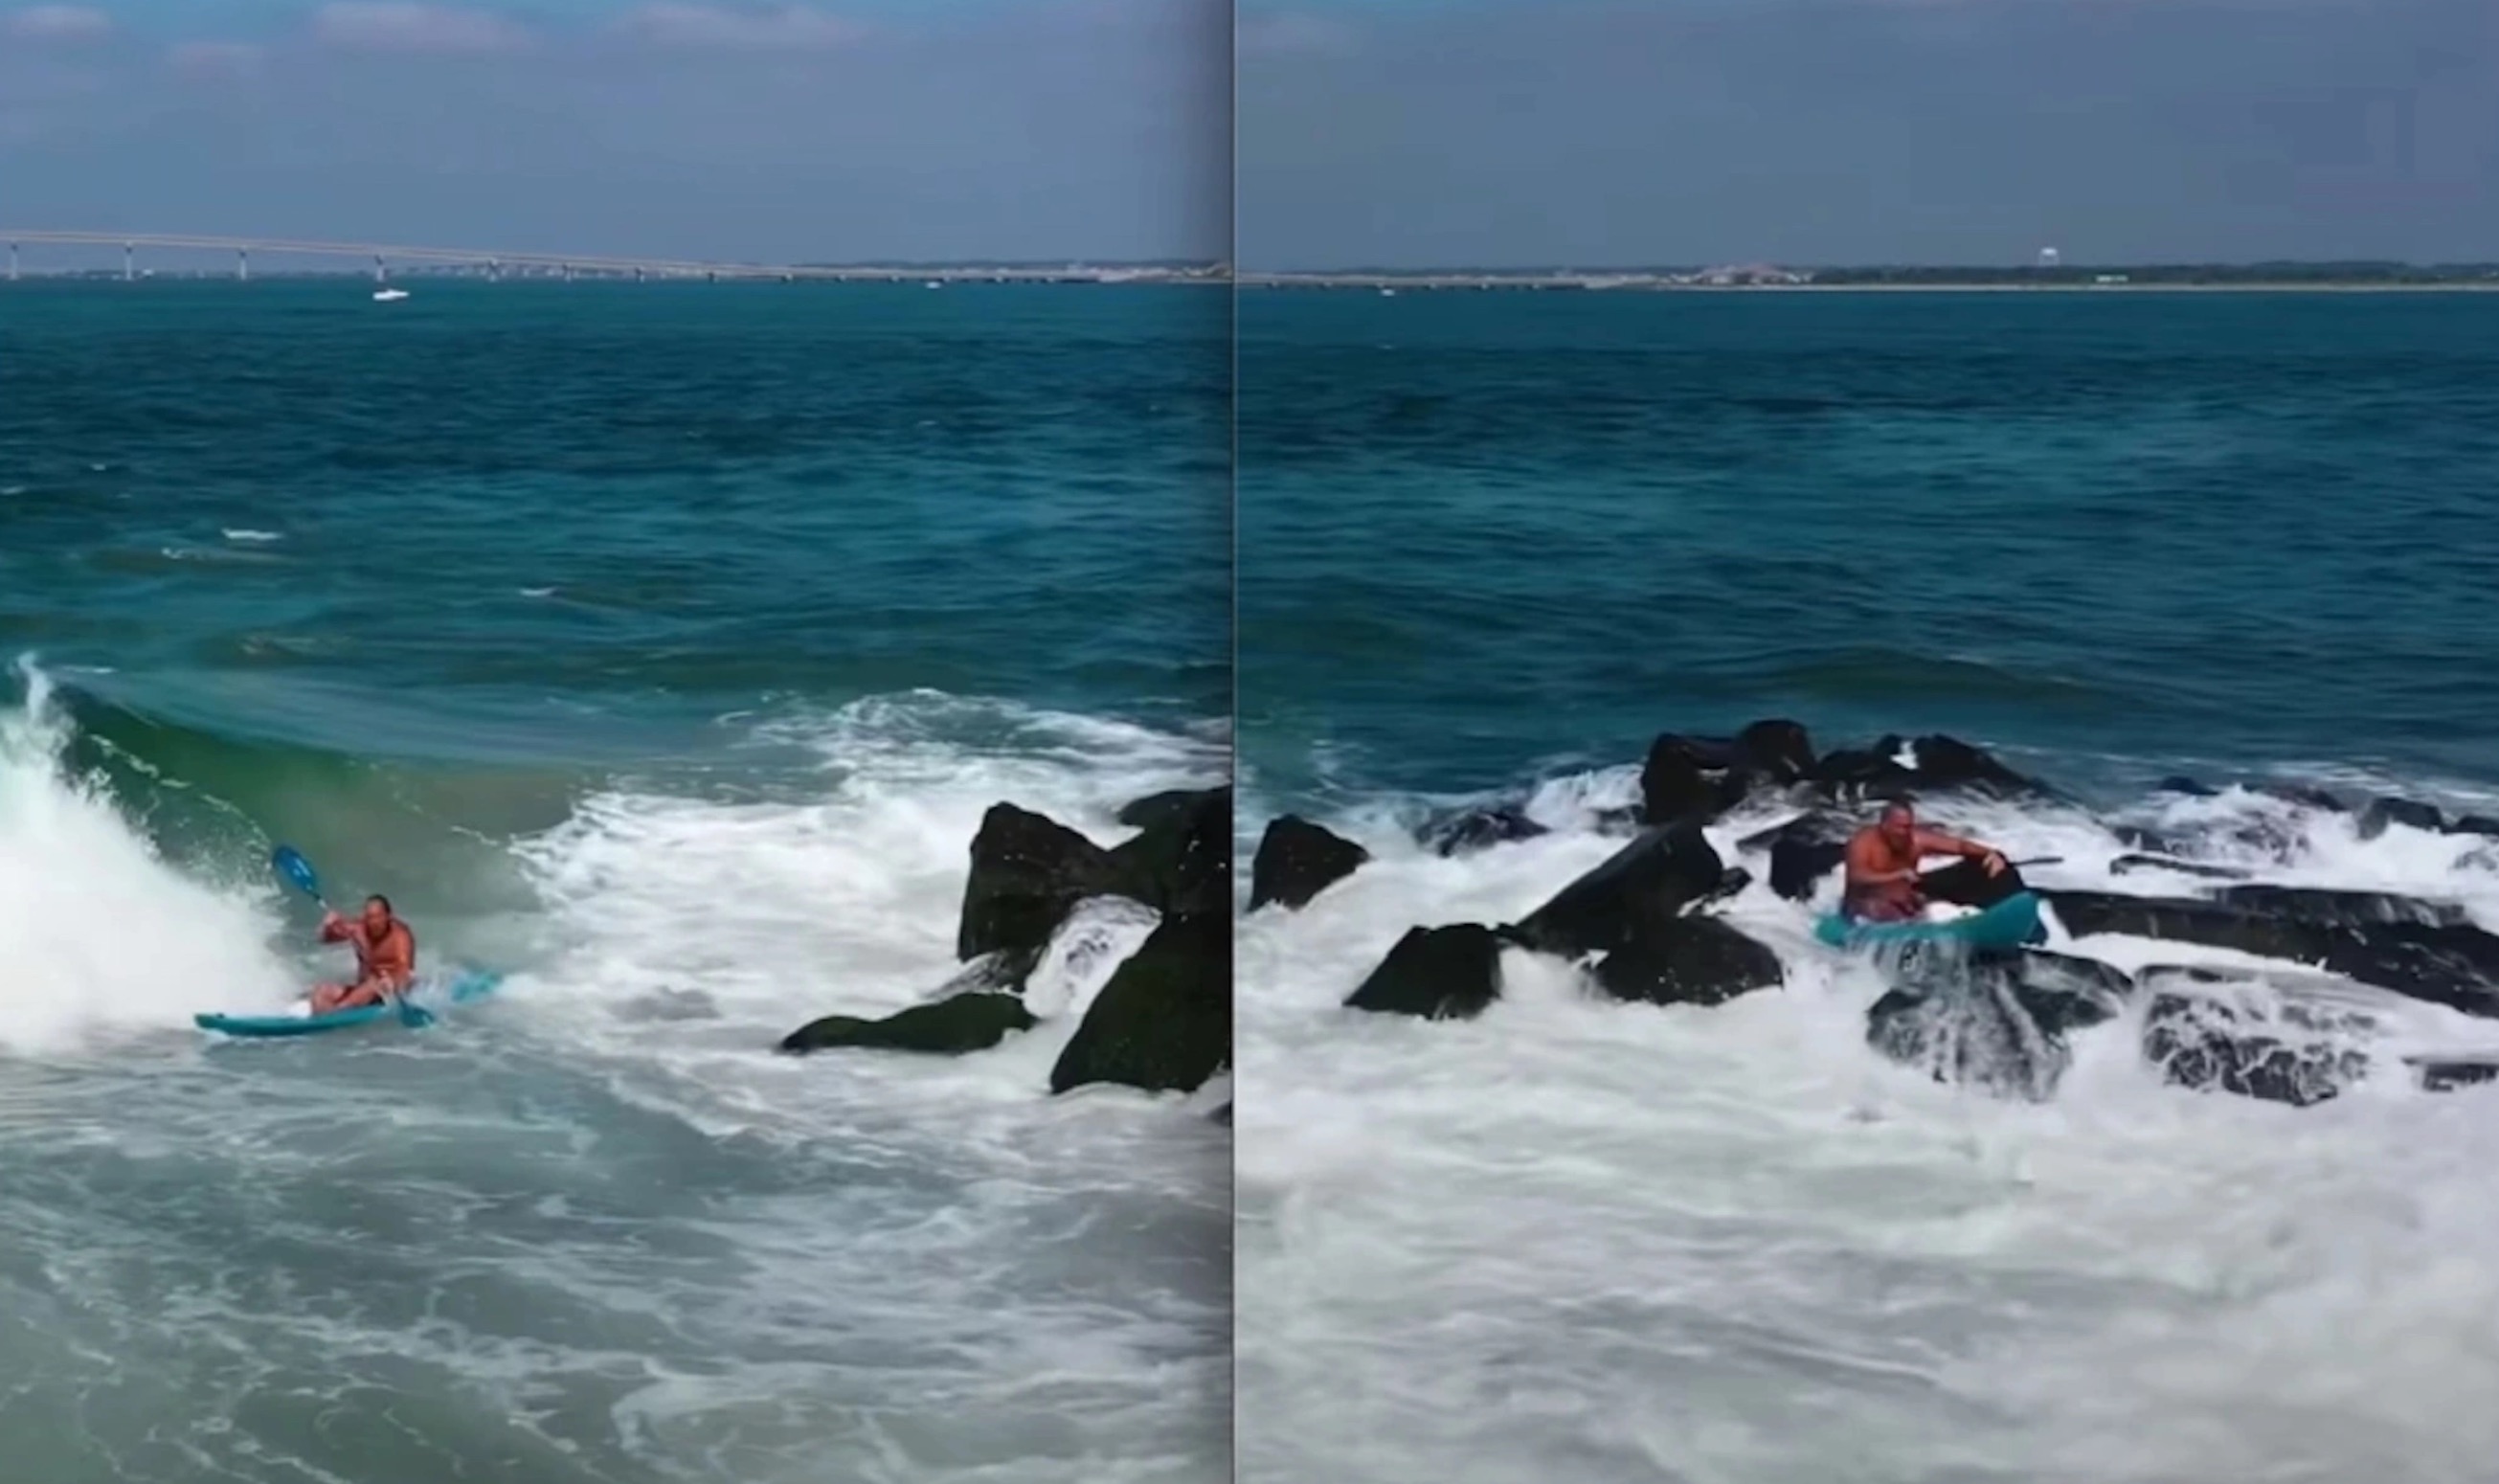 VIDEO: Kayaker Gets Pummeled By Wave, Miraculously Lands Safely On Jagged Rocks